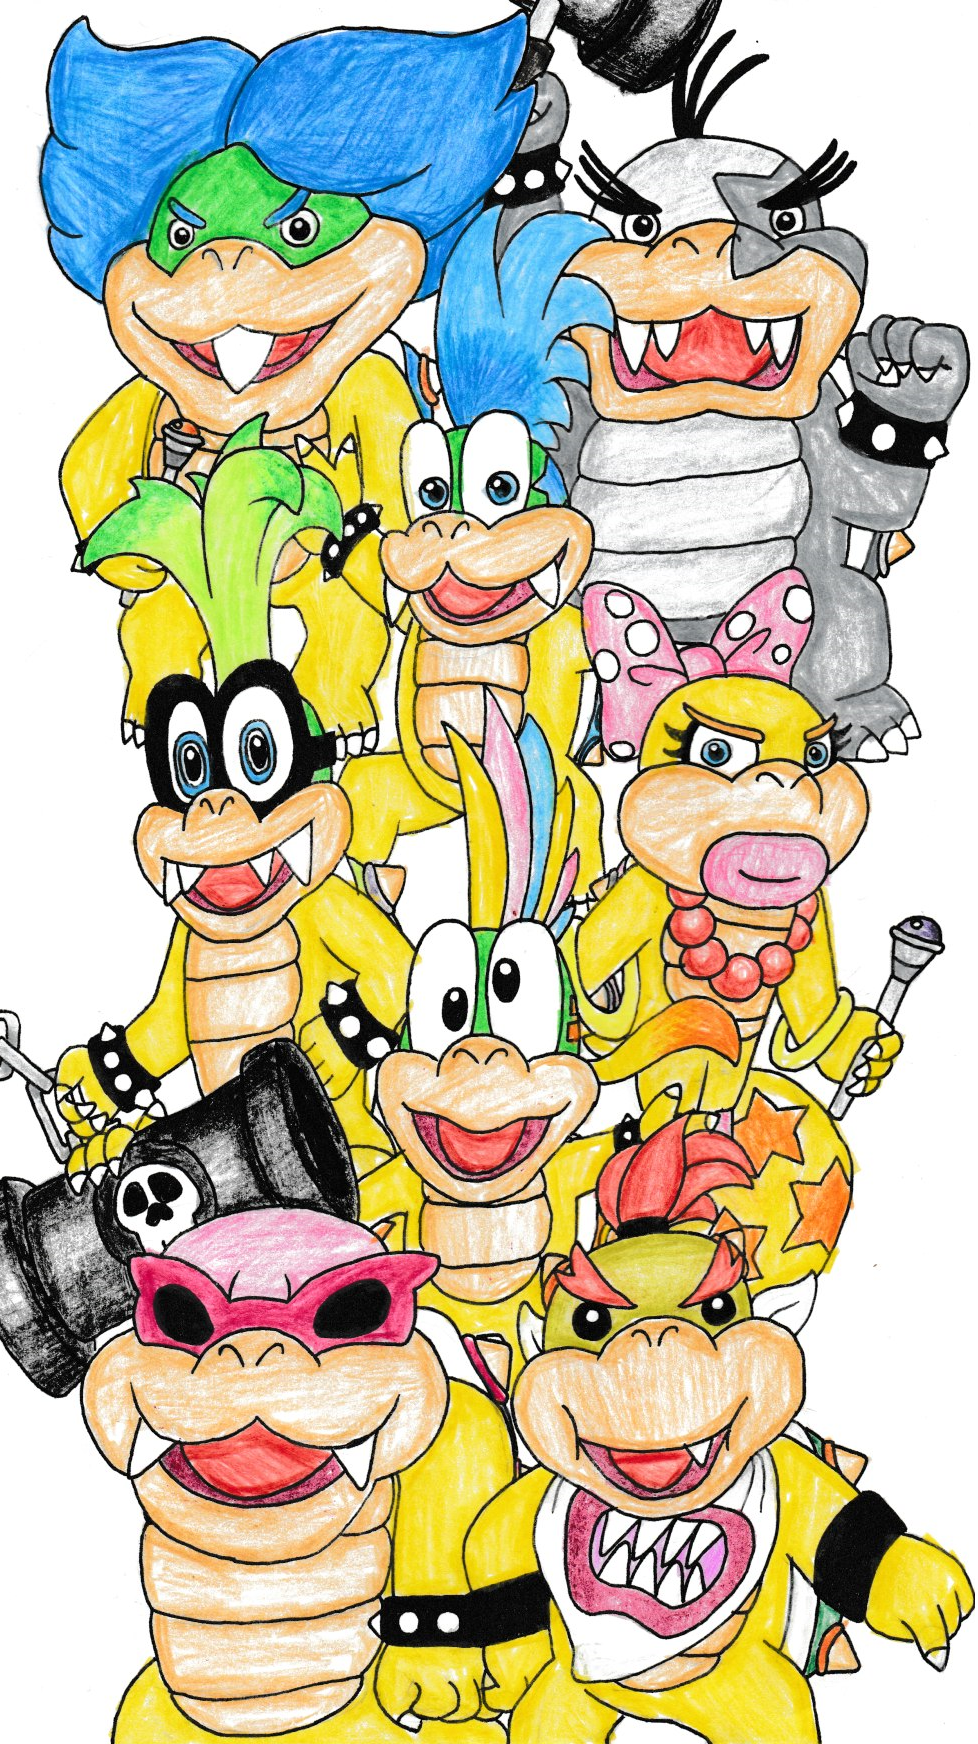 the_koopalings_and_bowser_jr__by_bbq_turtle-dboqysz.png